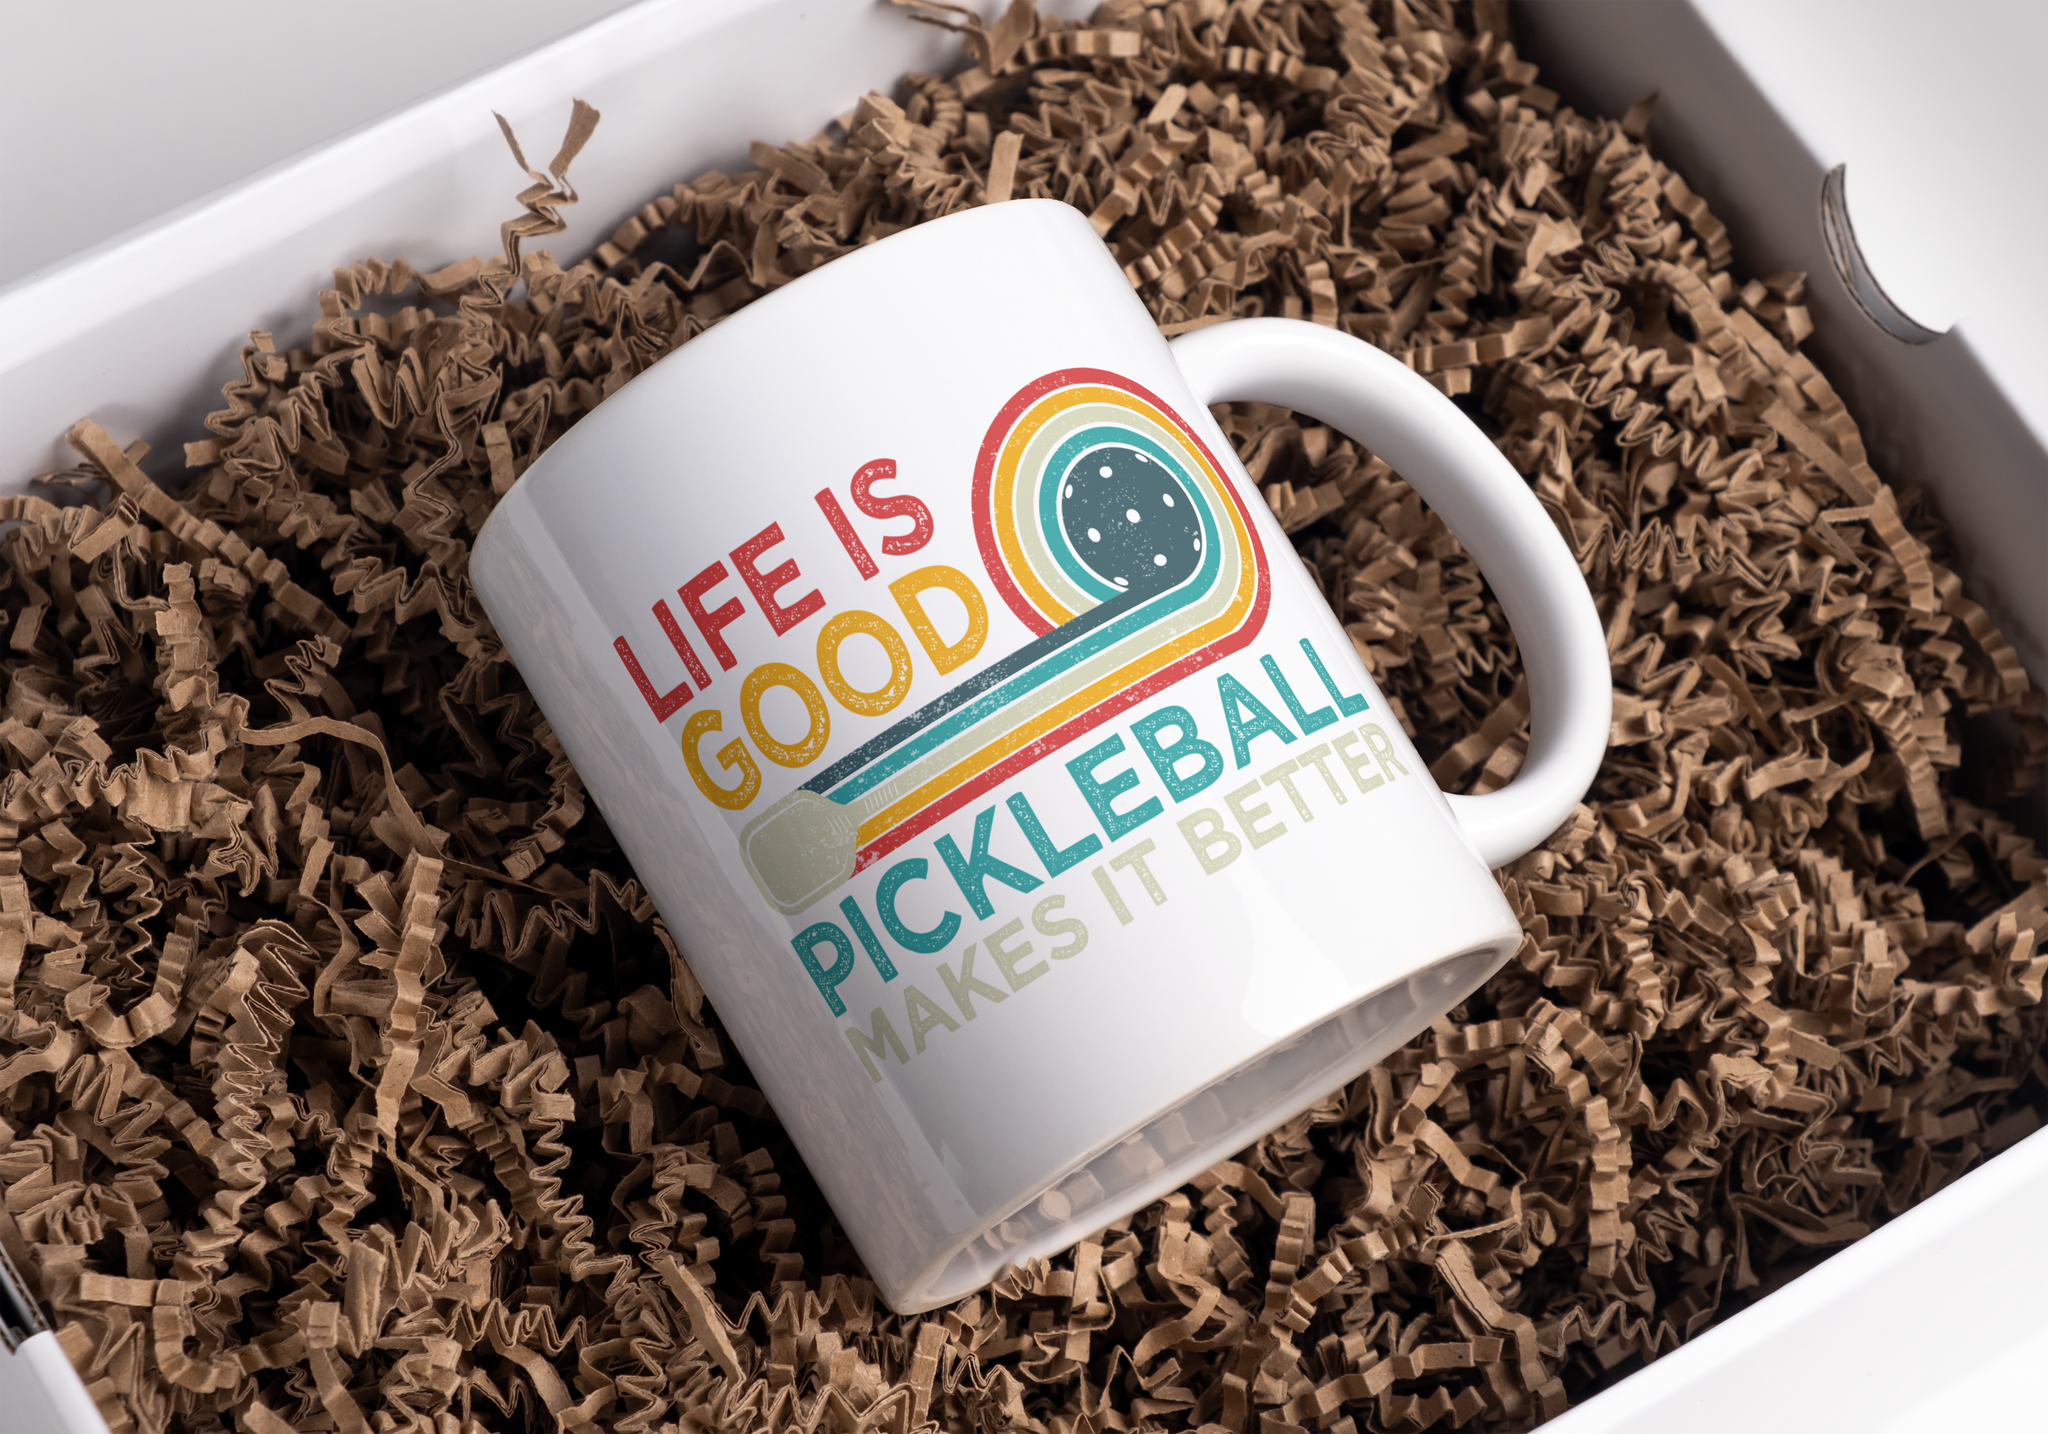 Pickleball Retro design mug, with love louise, made in tennessee, handmade in nashville, life is good pickleball makes it better